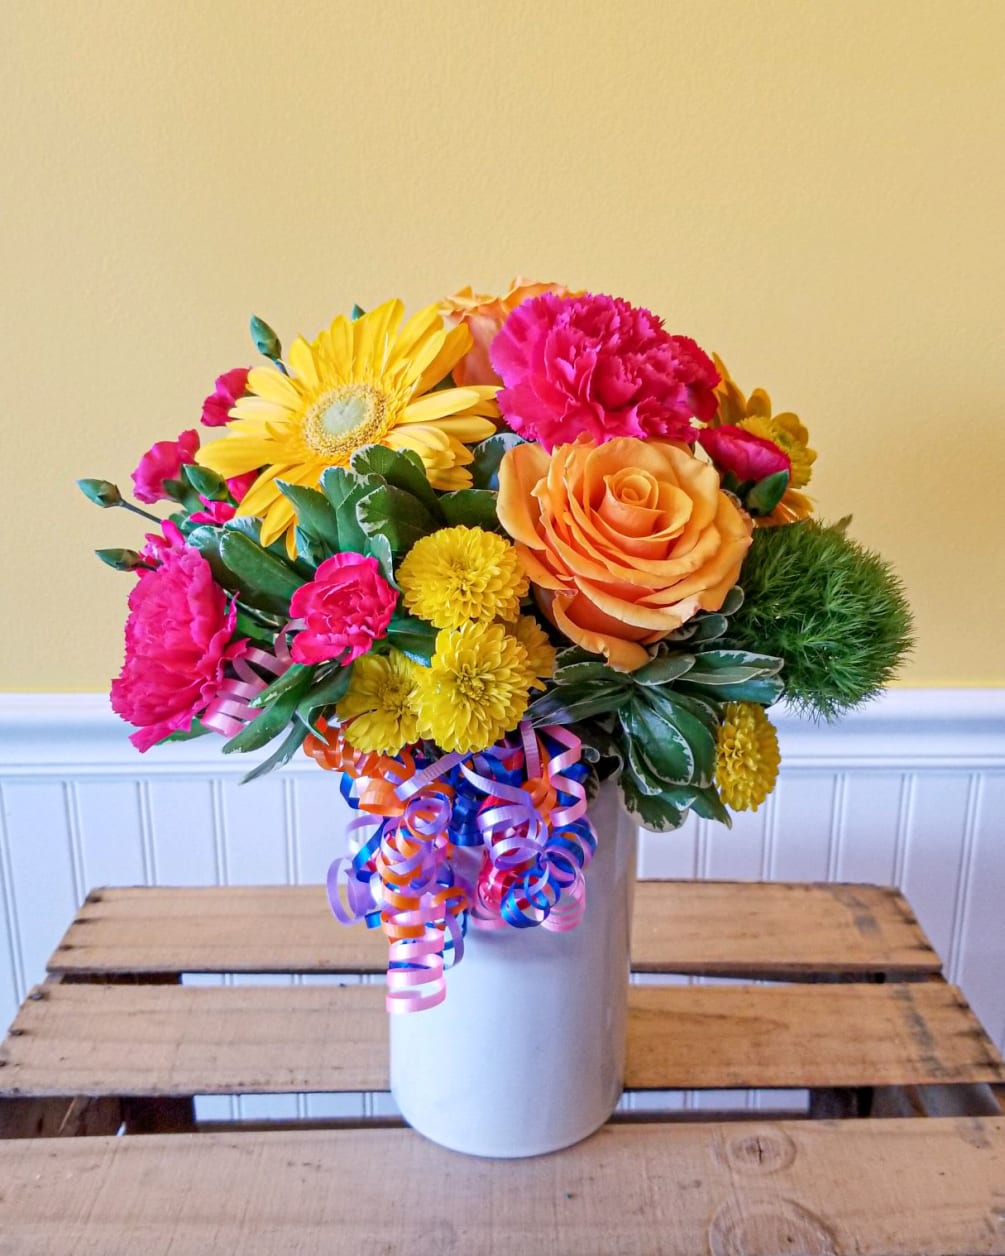 This colorful bouquet is the perfect way to celebrate a special day.